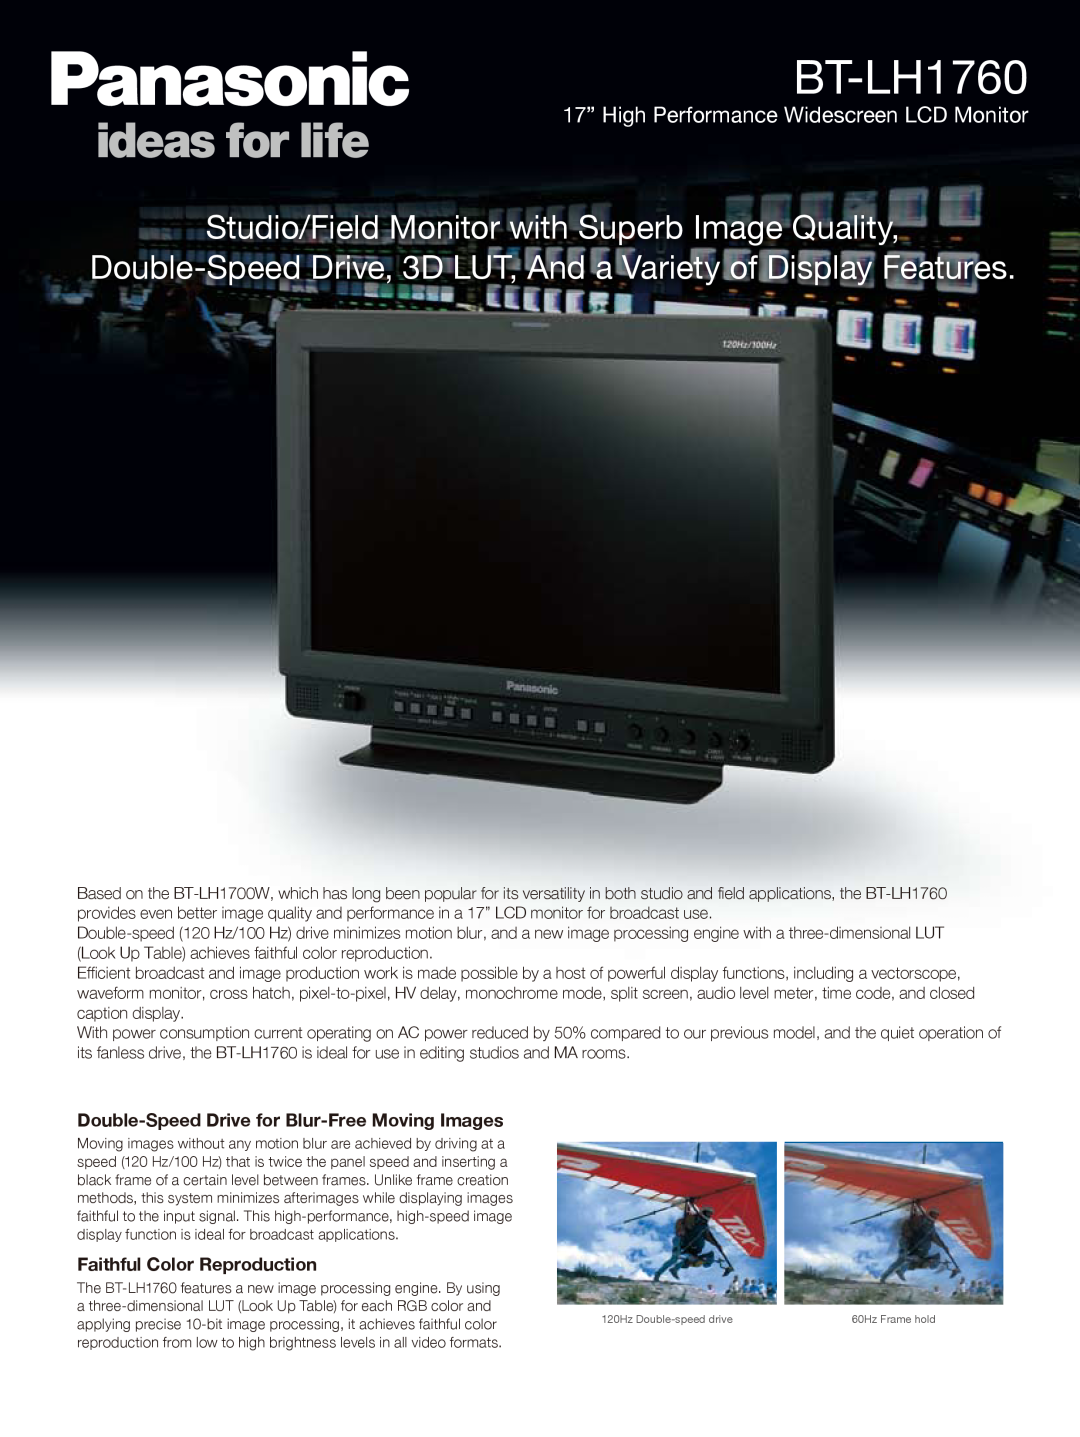 Panasonic BT-LH1760 manual Double-Speed Drive for Blur-Free Moving Images, Faithful Color Reproduction 